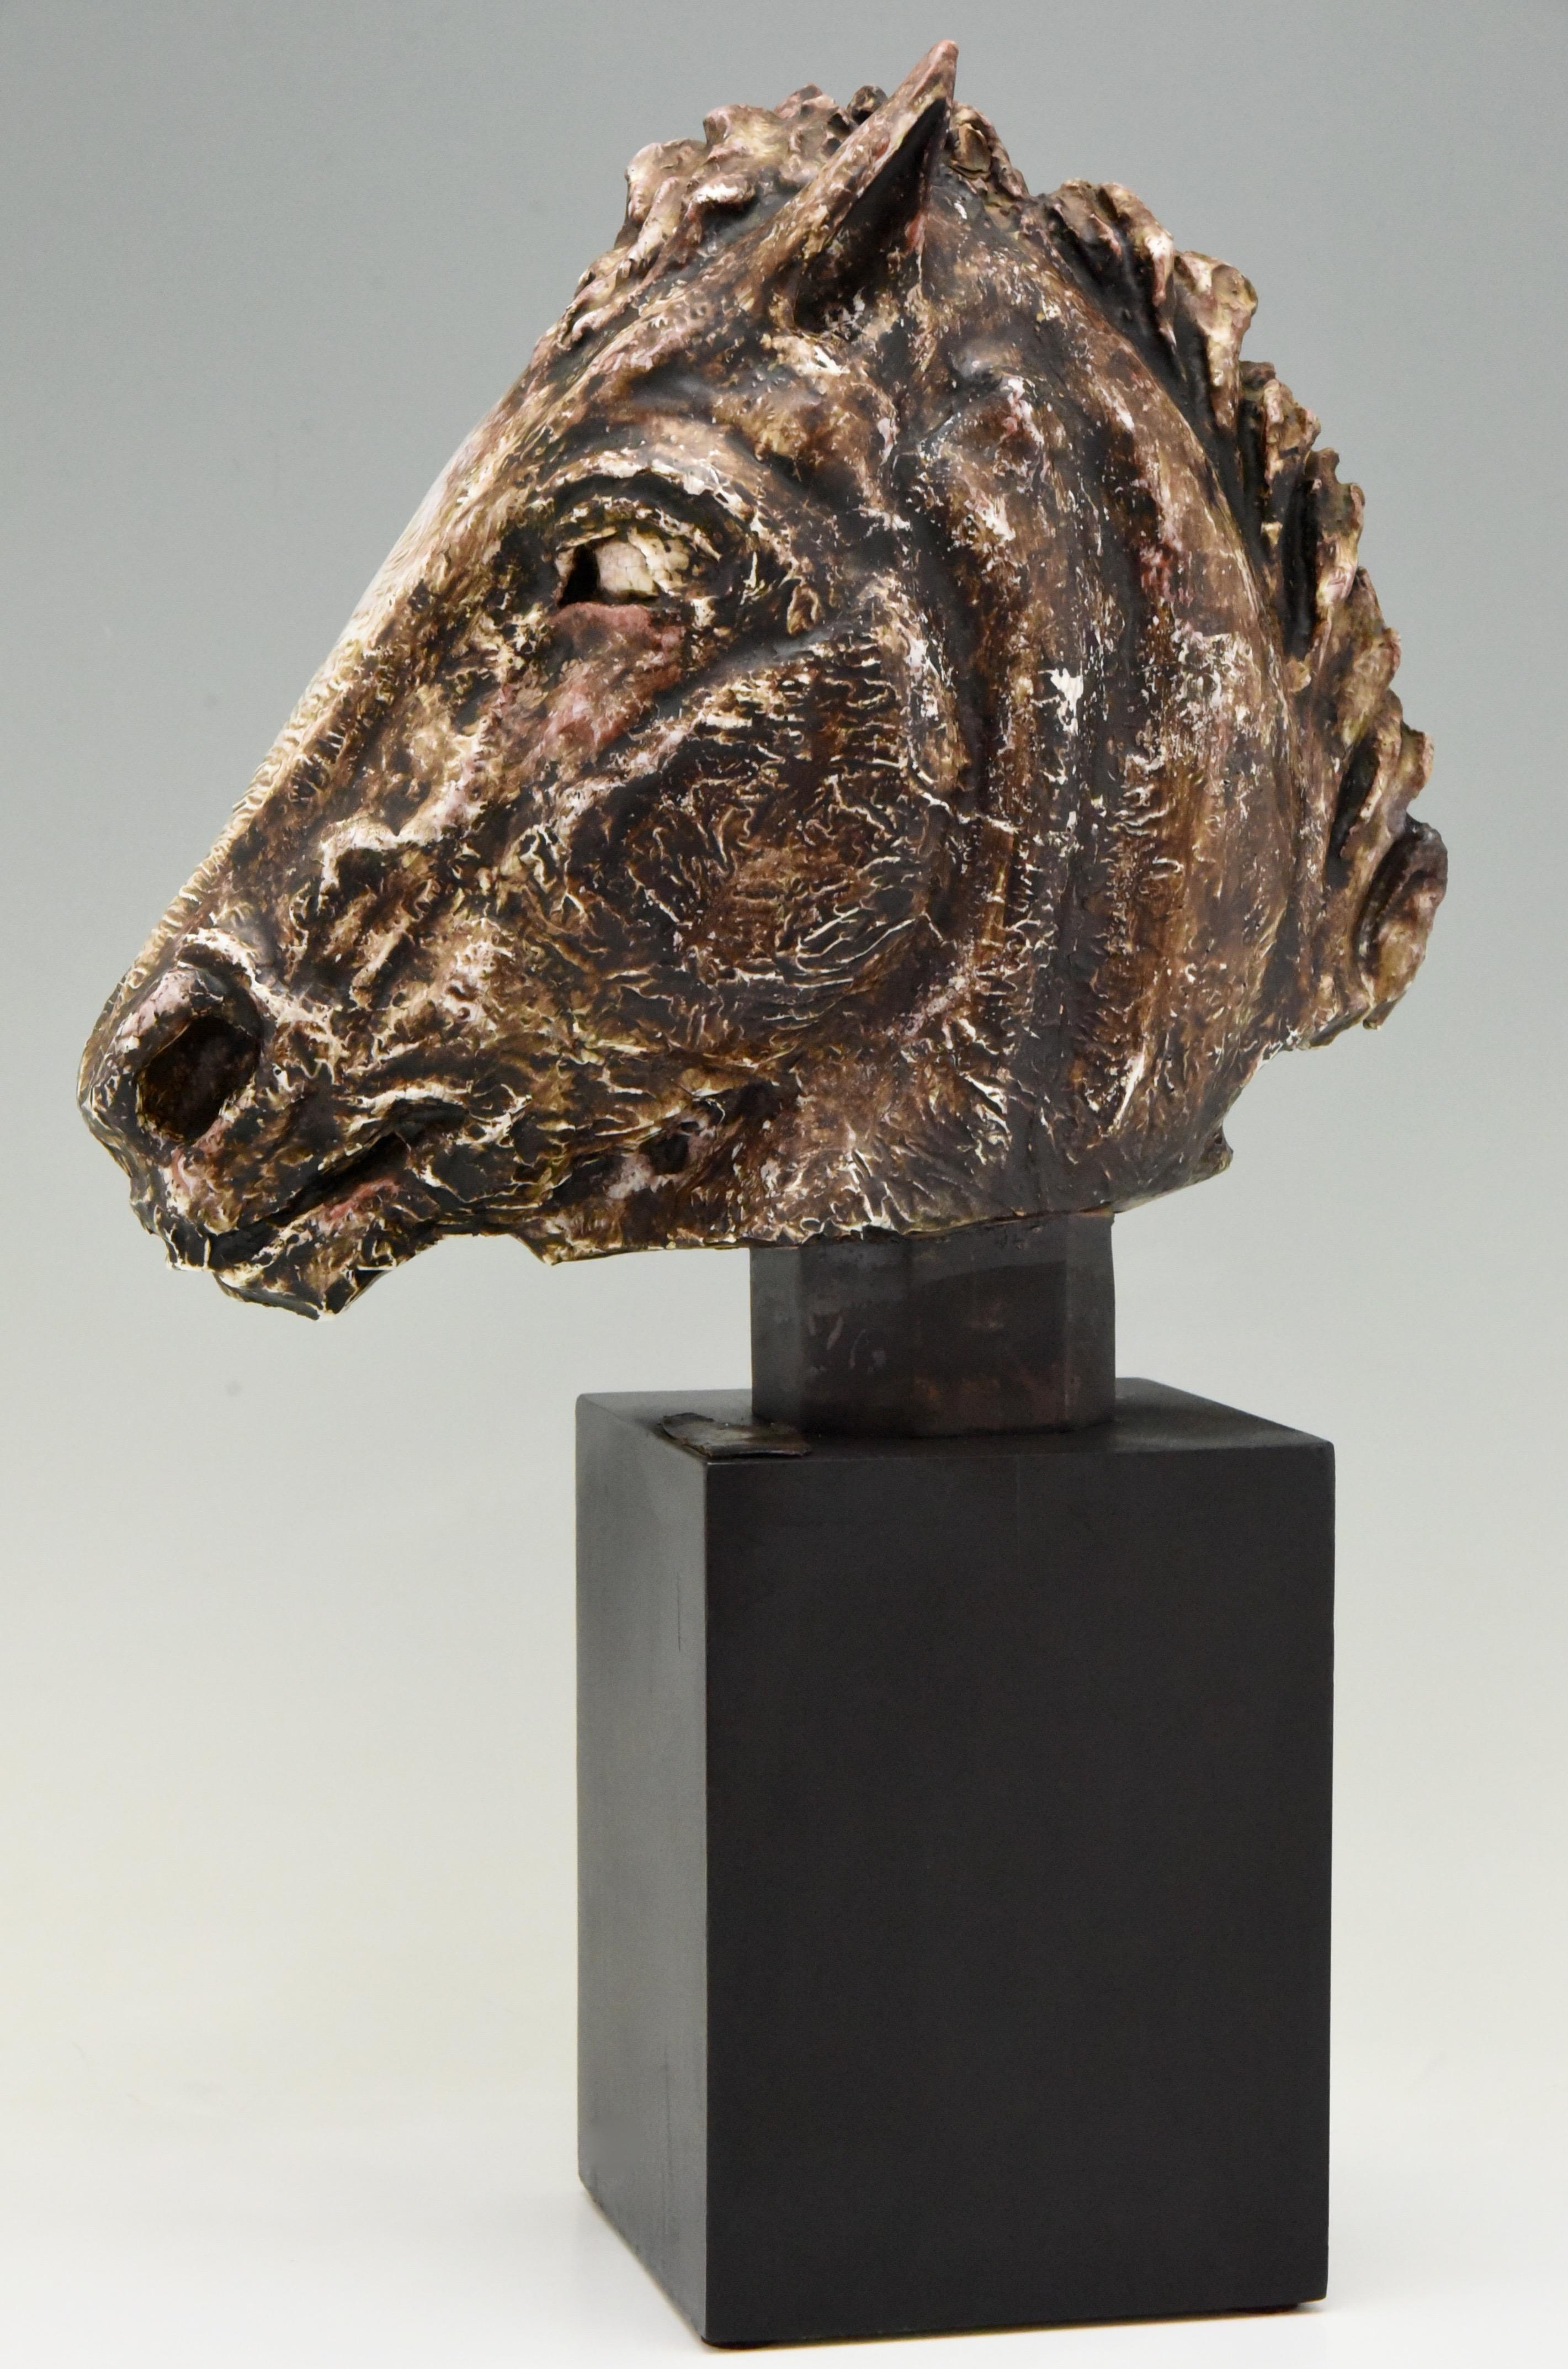 Midcentury ceramic sculpture bust of a horse with brown and white glaze. The sculpture is signed Schor on the wooden base,
circa 1960-1970.